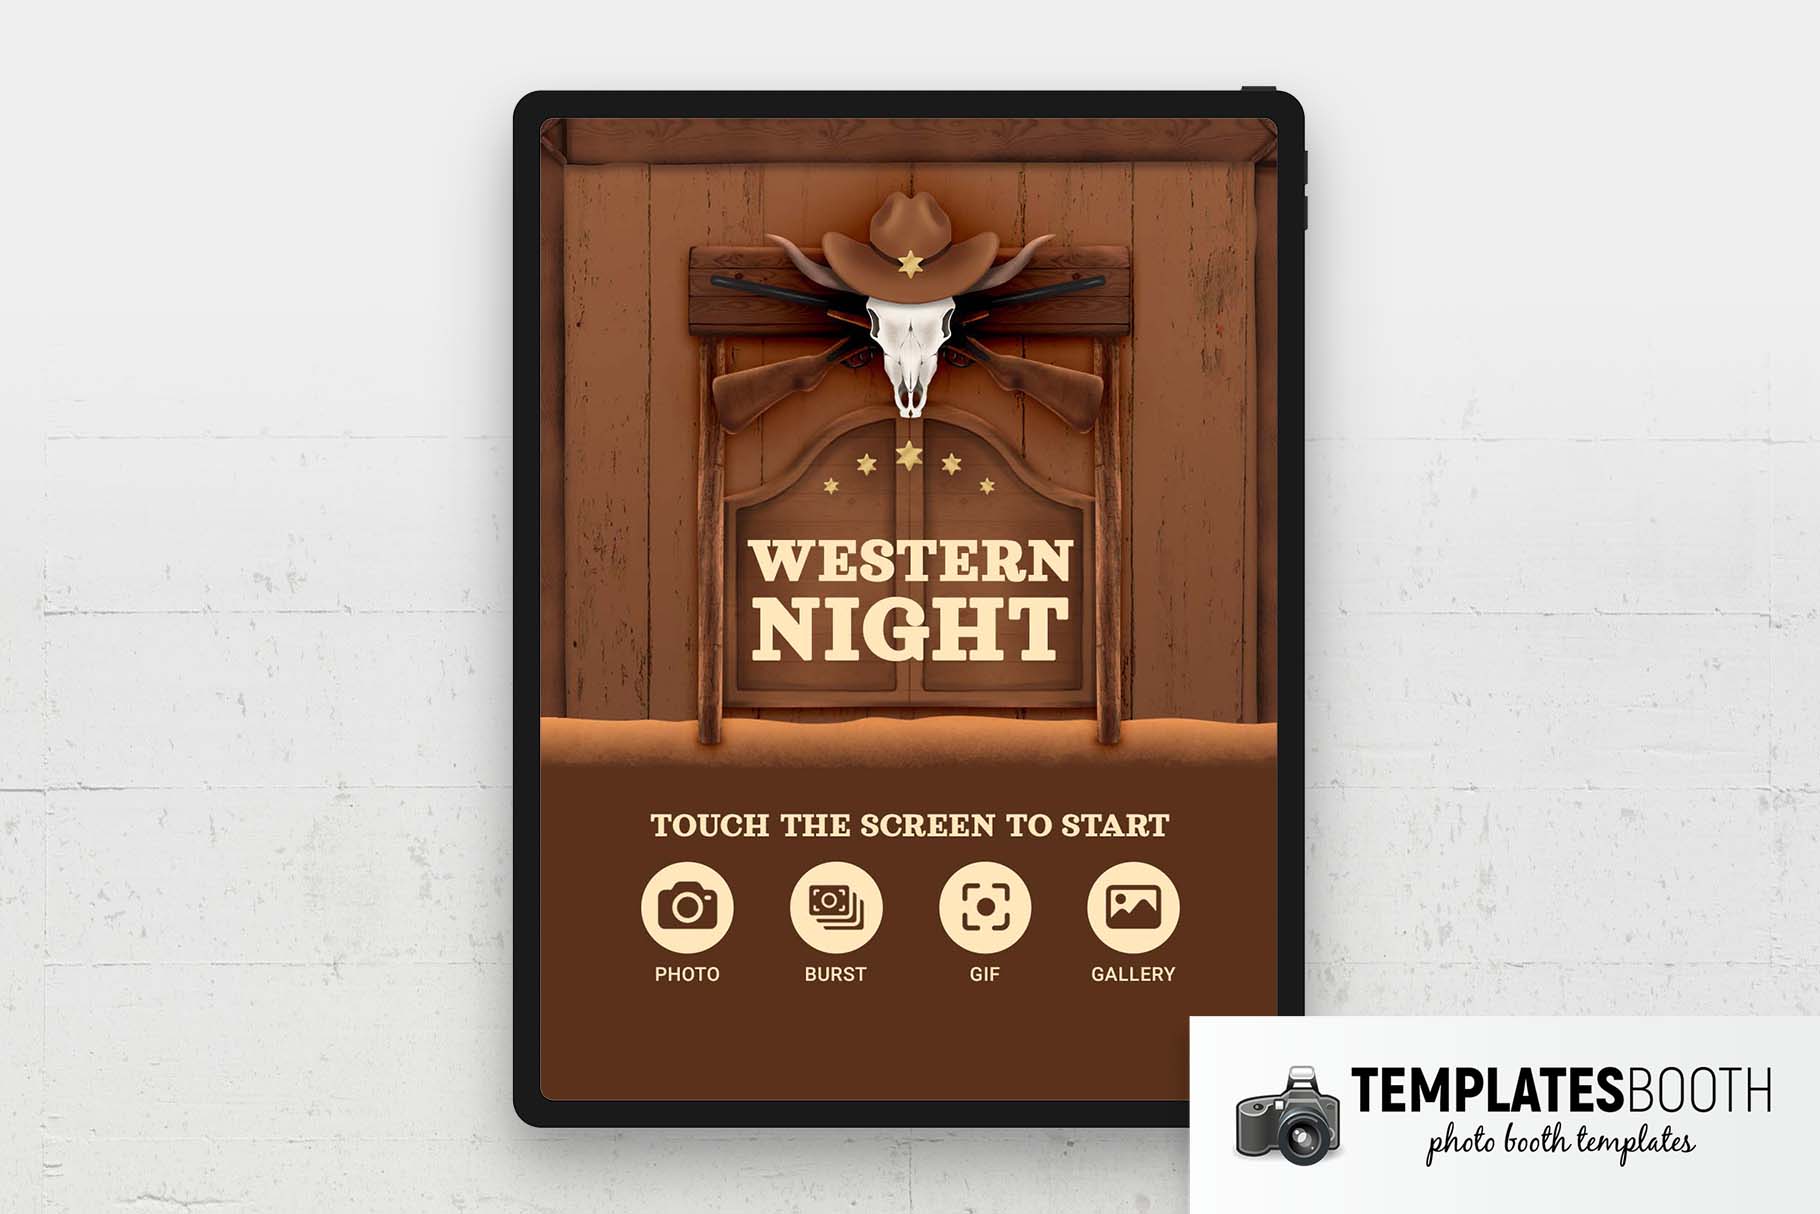 Western Night Photo Booth Welcome Screen